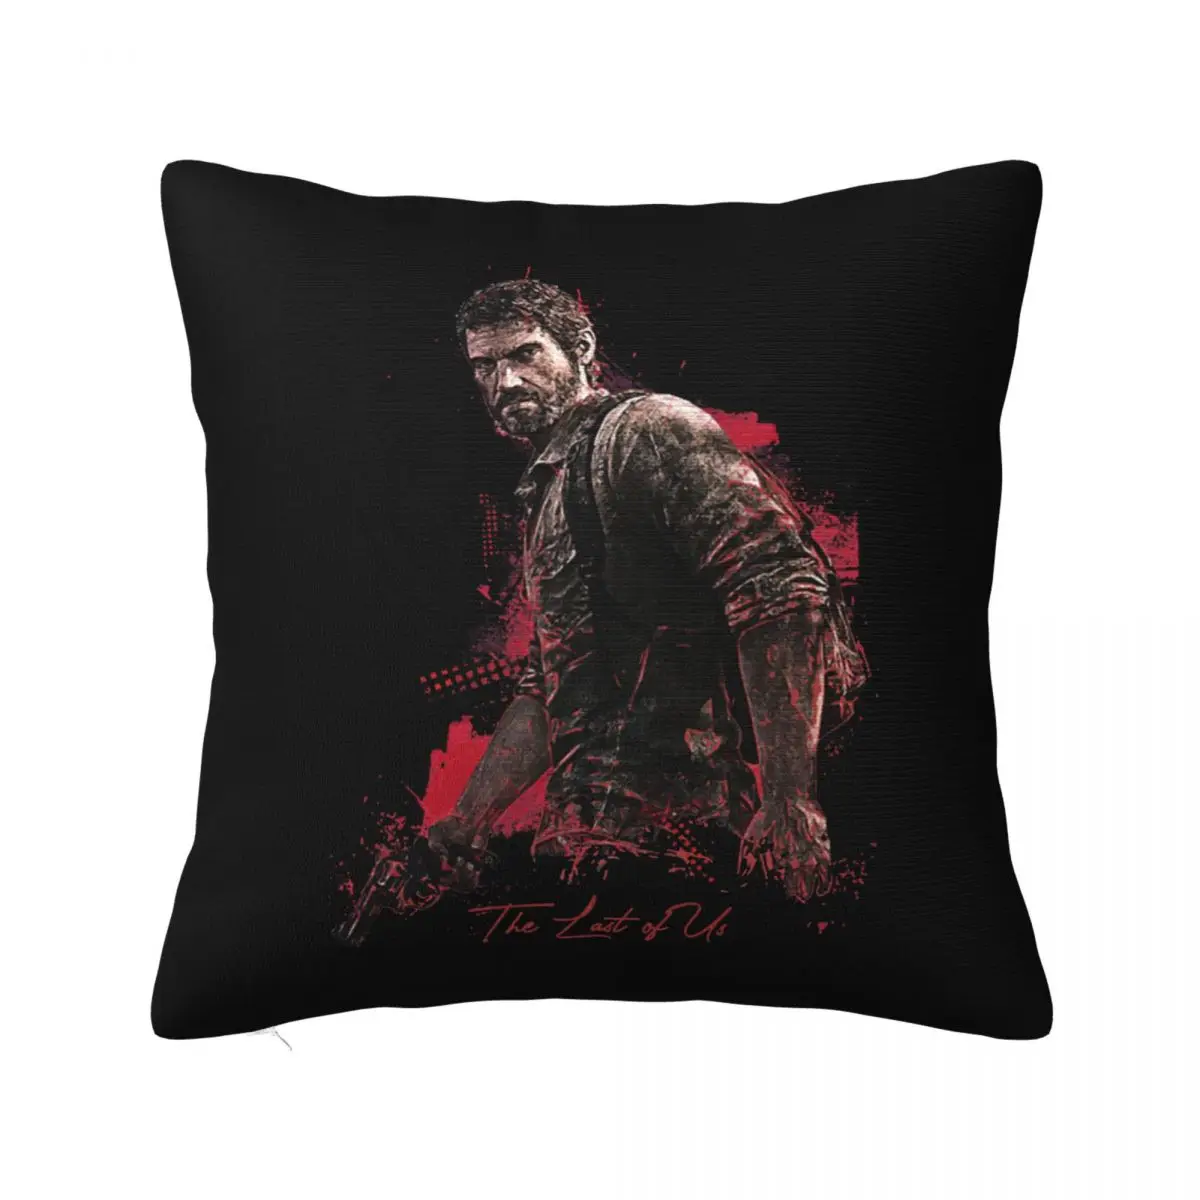 

Joel The Last Of Us Pillowcase Printed Polyester Cushion Cover Decorative Adventure Game Throw Pillow Case Cover Home Square 18"